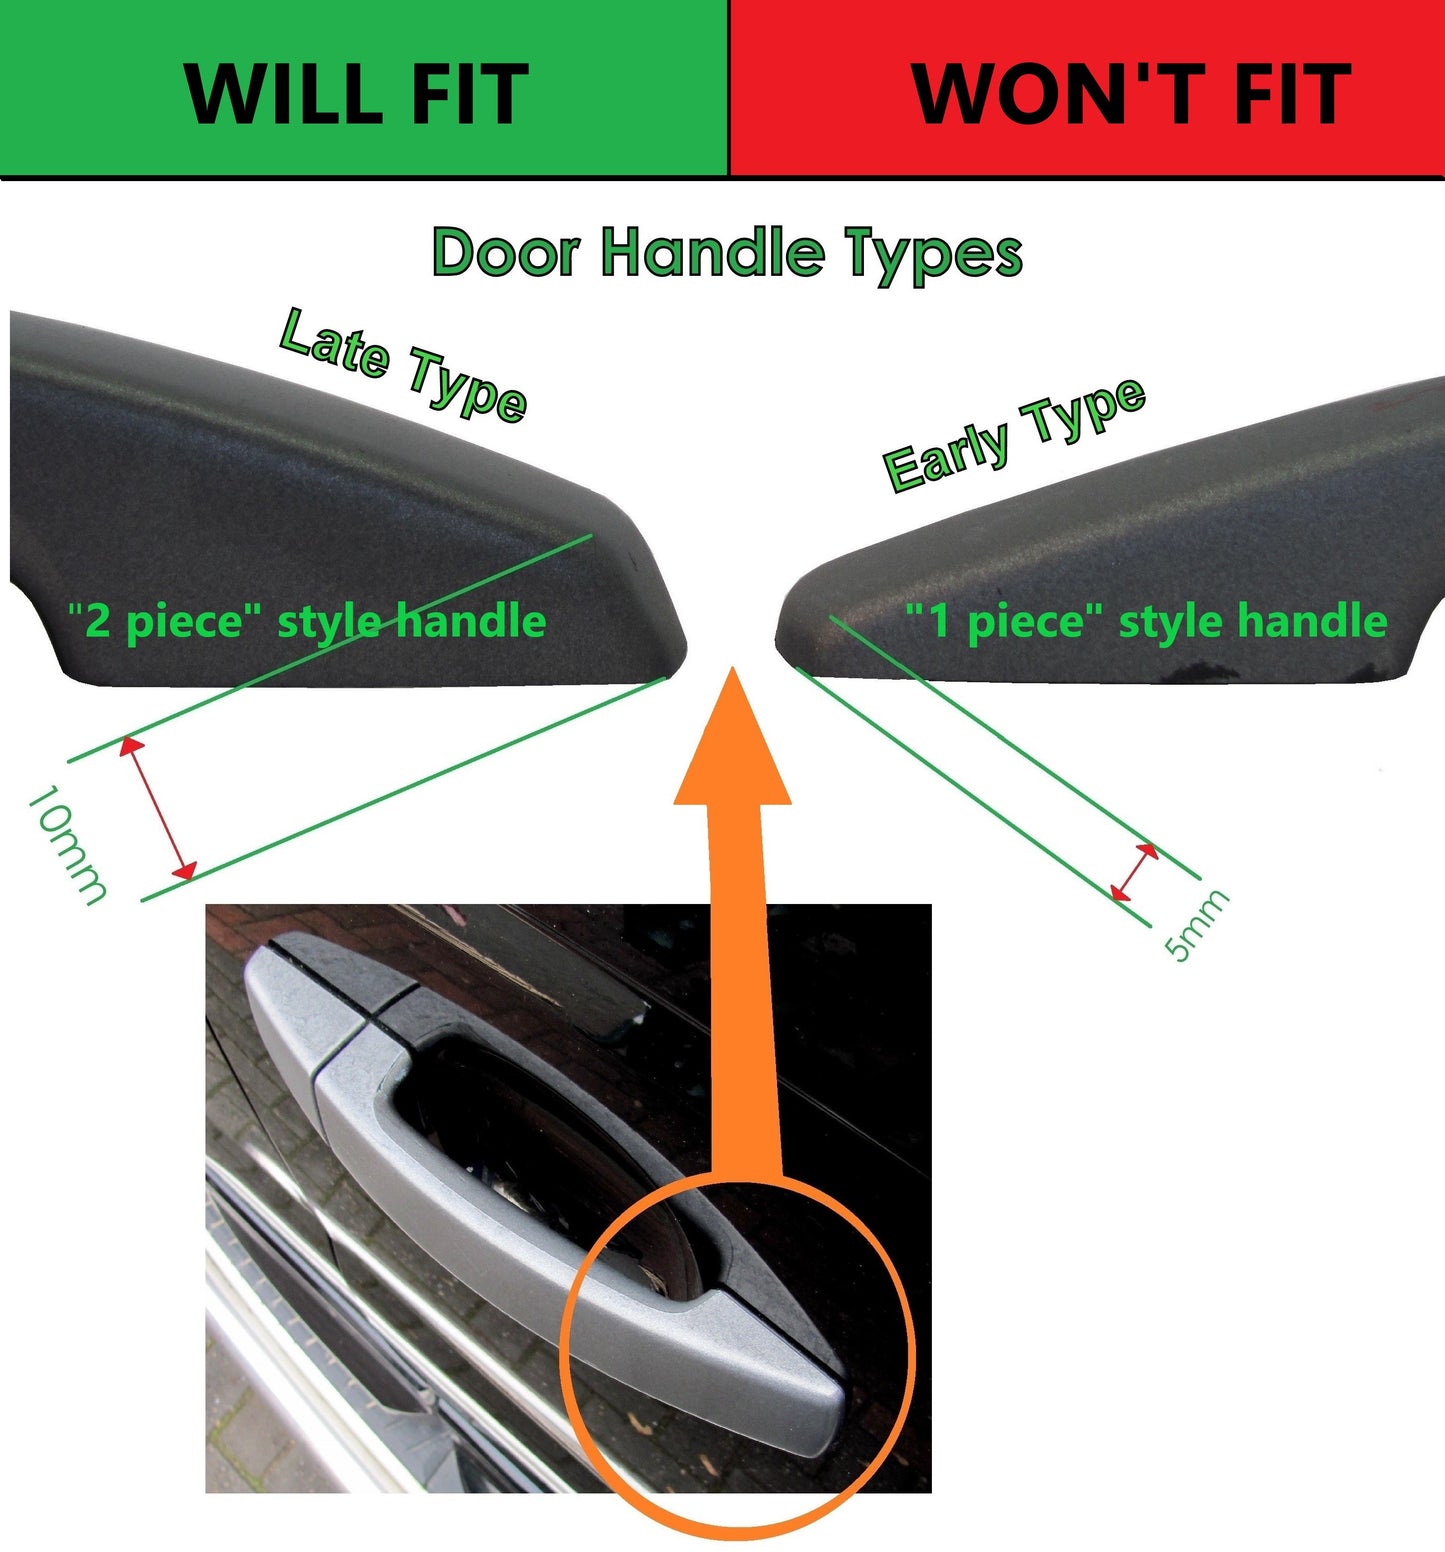 Door Handle "Skins" for Land Rover Discovery 3 fitted with 2 pc Handle - Rimini Red